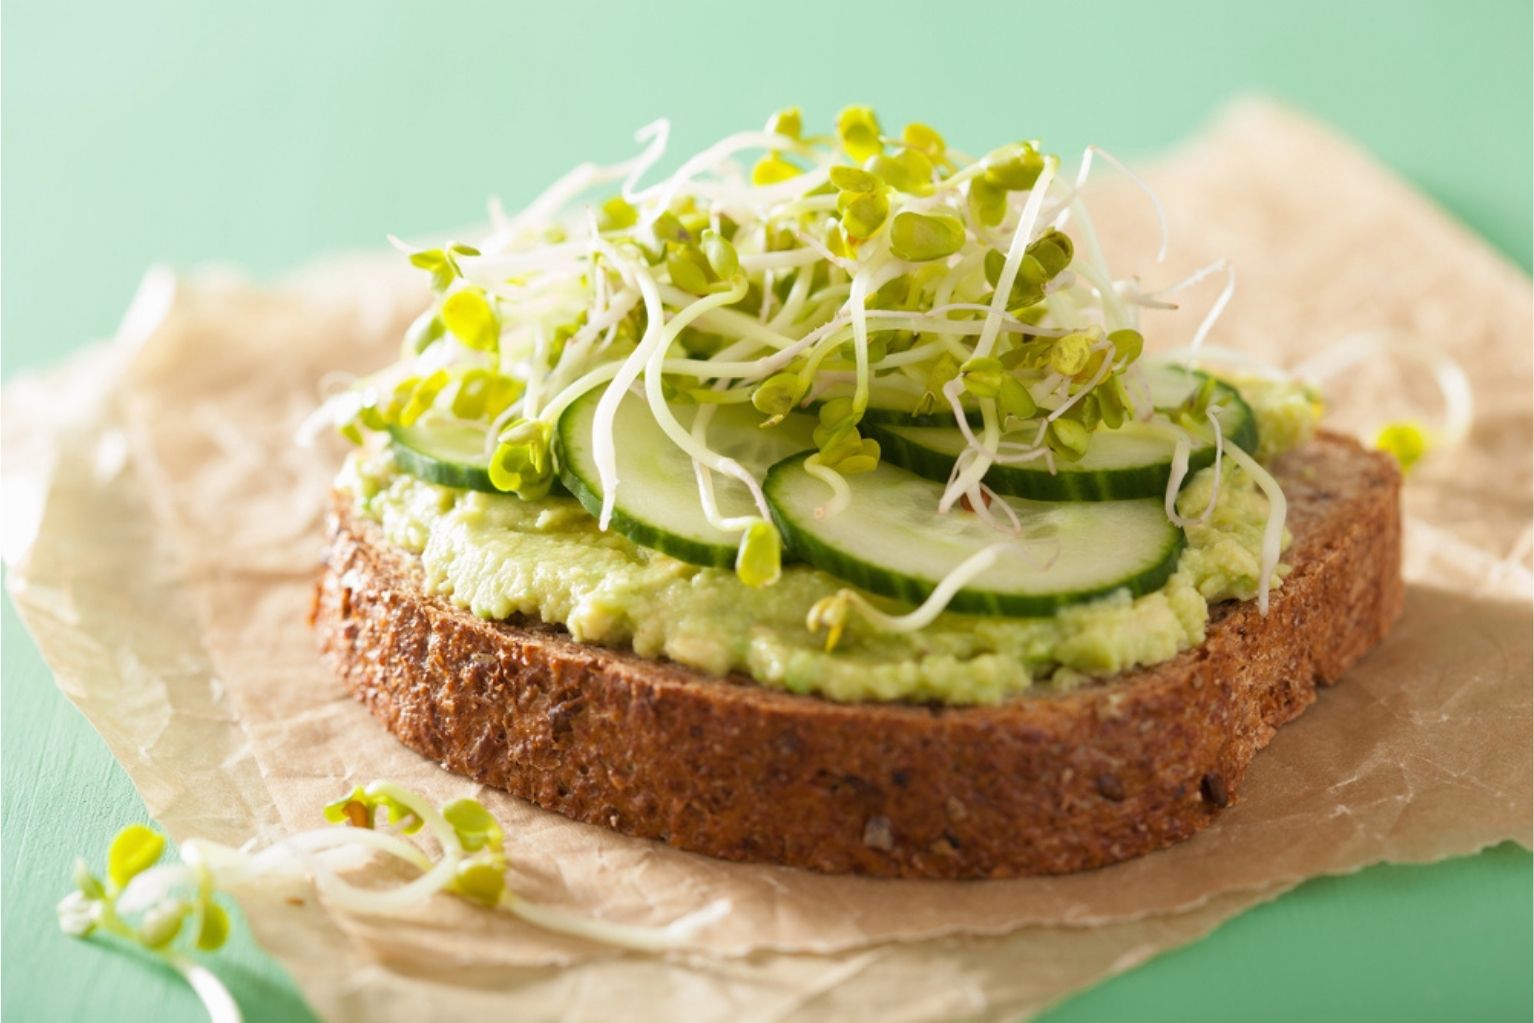 One slice of whole wheat bread with avocado, cucumber and sprouts on a piece of parchment paper.